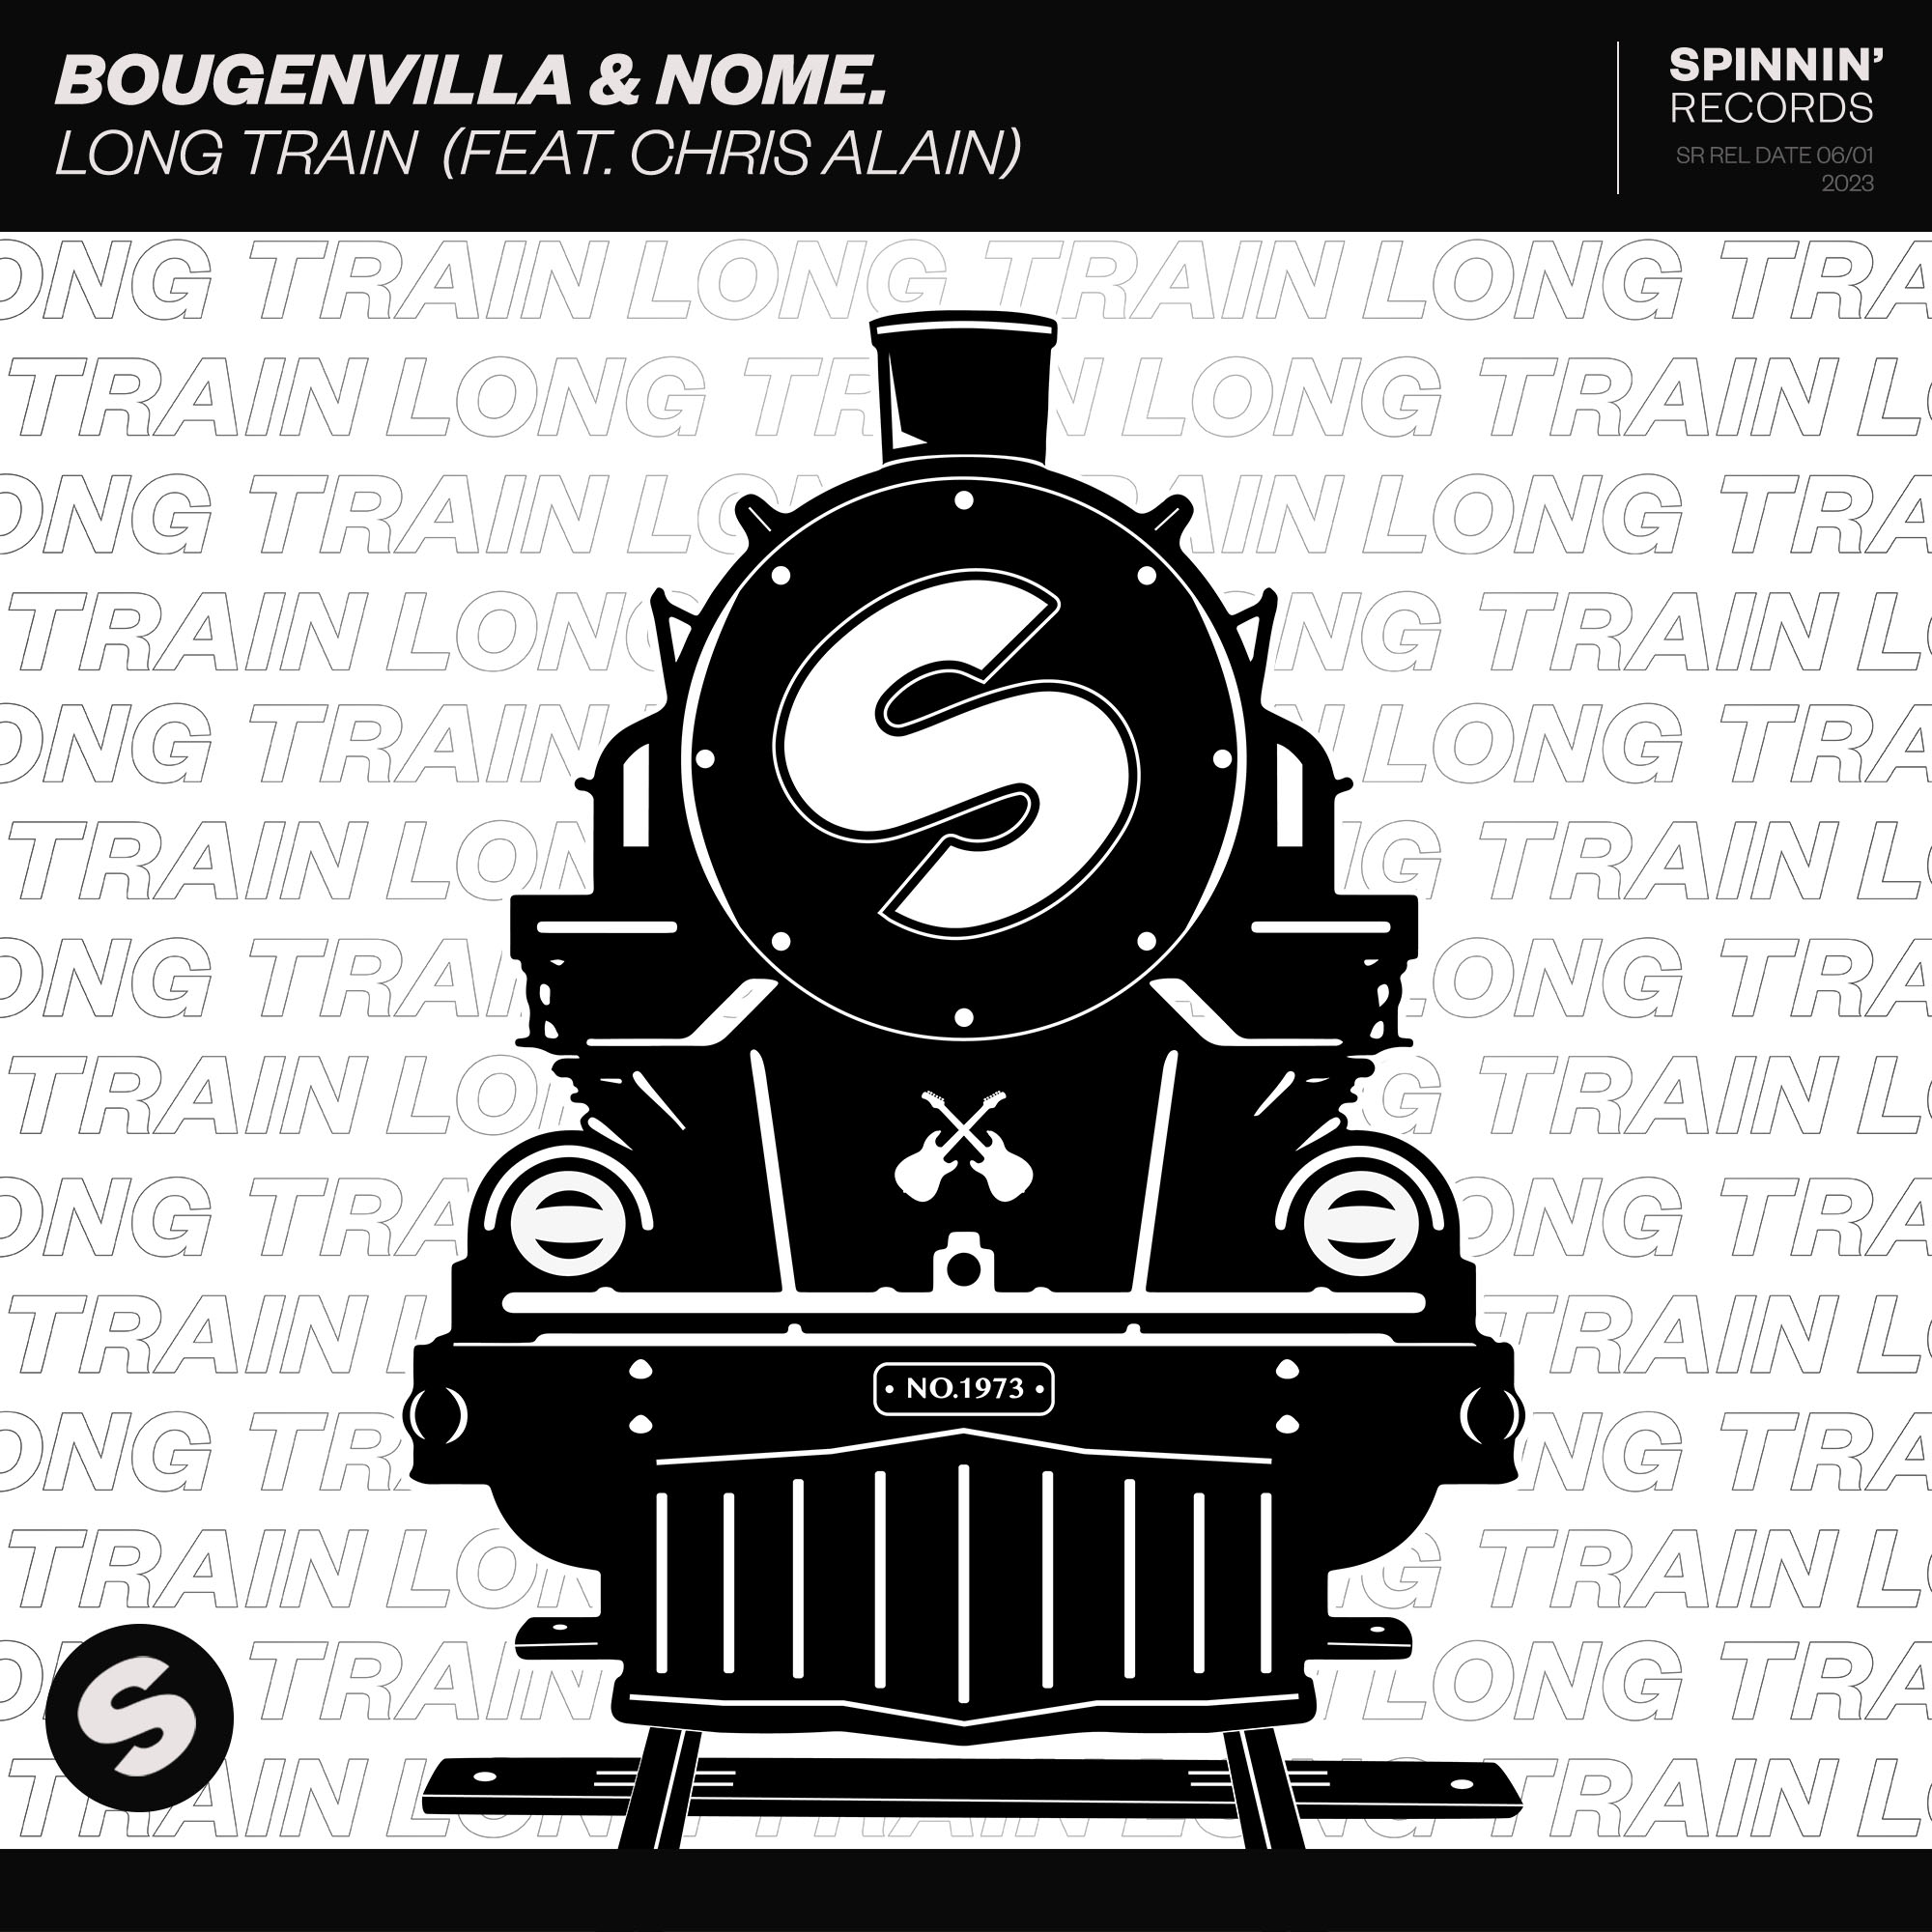 Bougenvilla & NOME. featuring Chris Alain — Long Train cover artwork